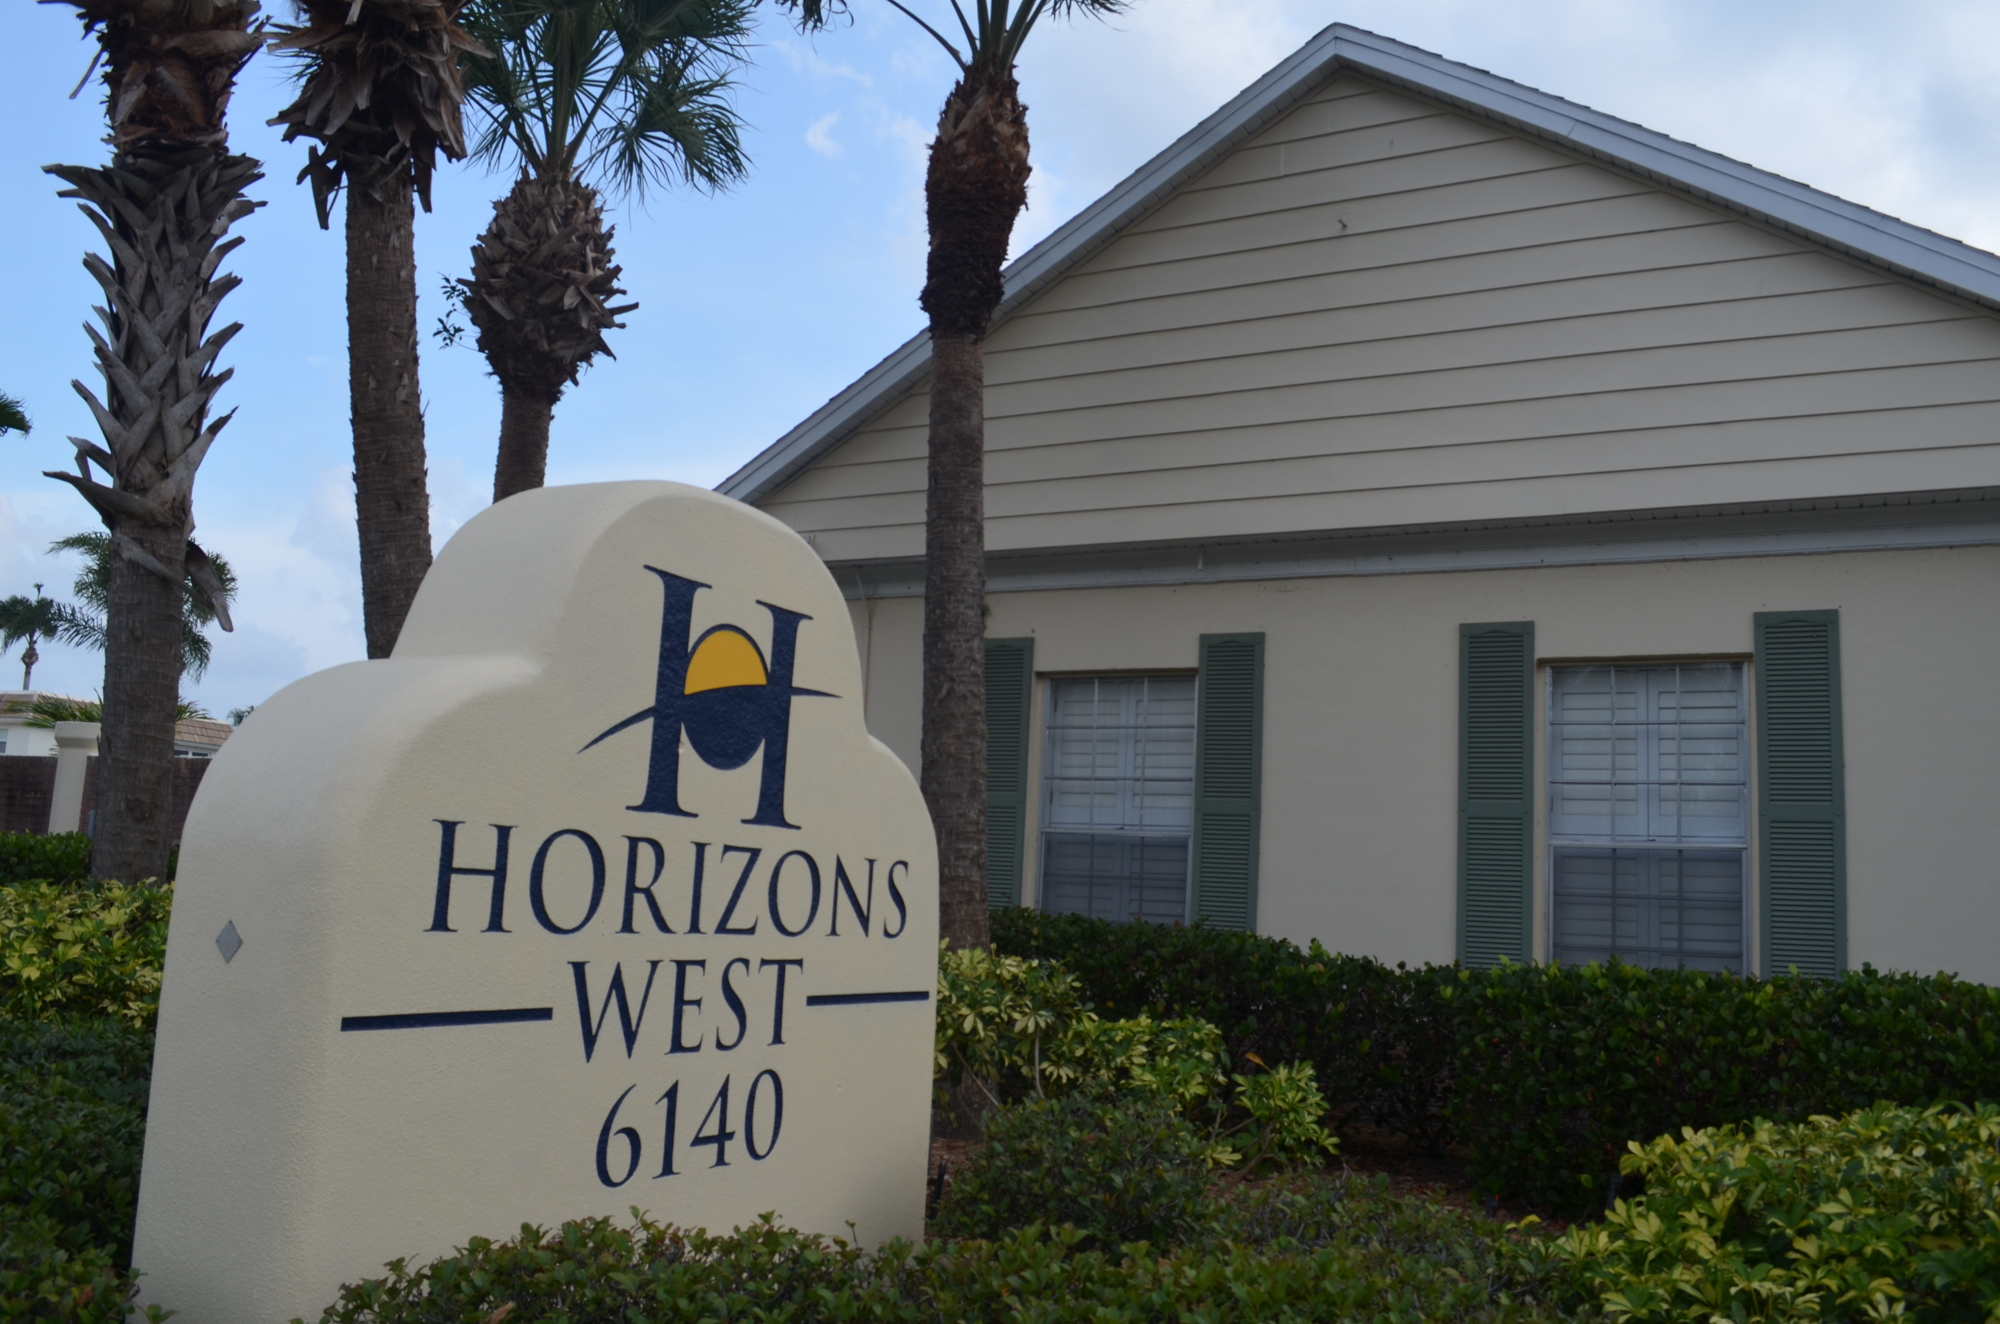 Residents of the Horizons West condominium complex expressed concerns about earlier plans for the project last year.